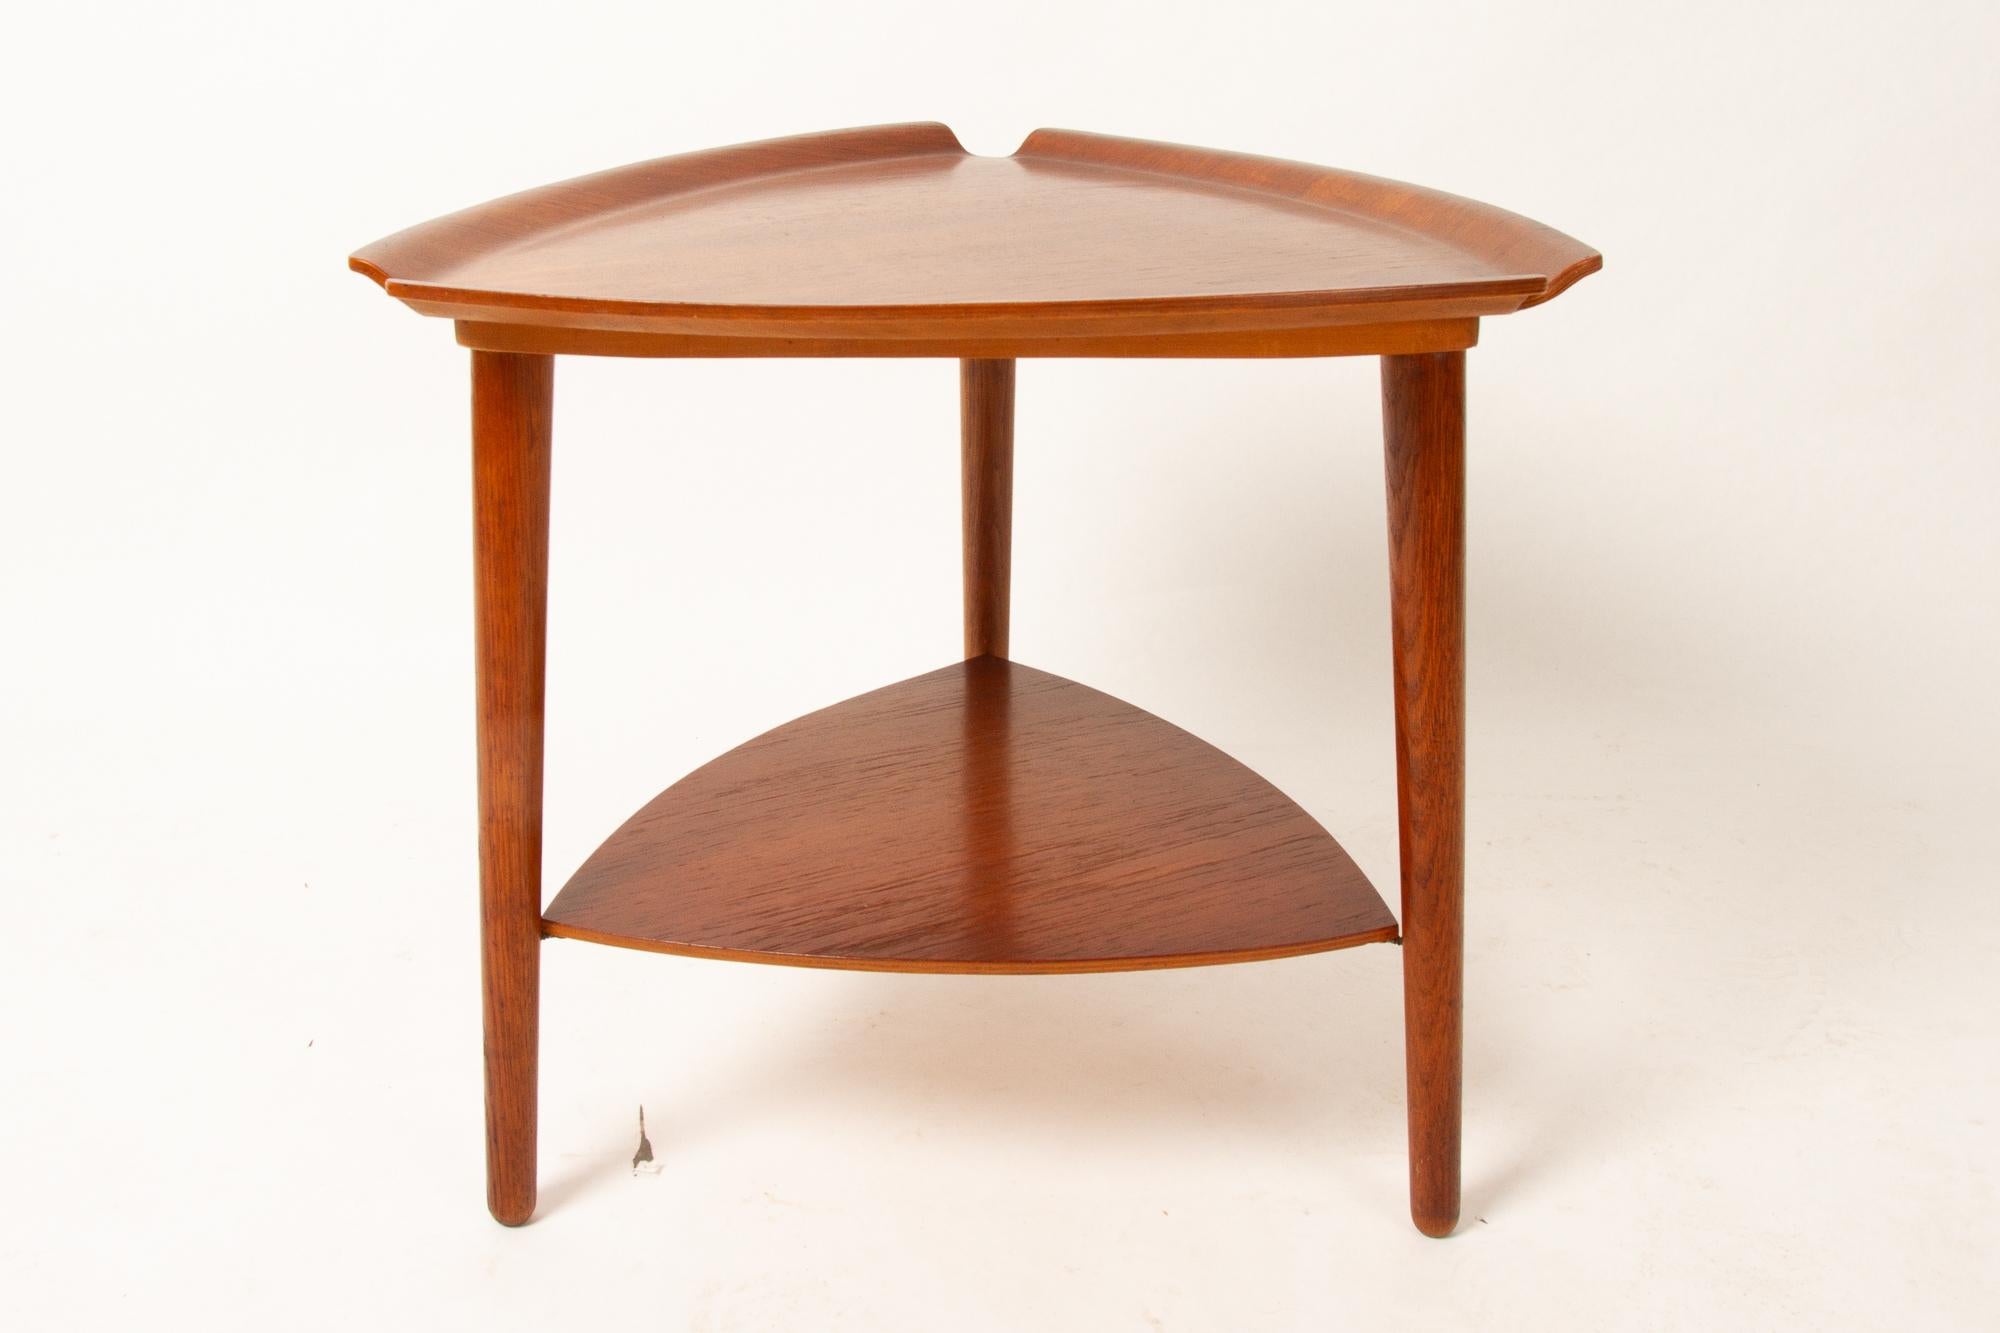 Vintage Danish teak side table 1960s.
Triangular side table with shelf. Table top teak veneered plywood with curved and flared edges, round cut-outs in each corner. Legs in solid oak.
Very good vintage condition. Cleaned, oiled and varnished.